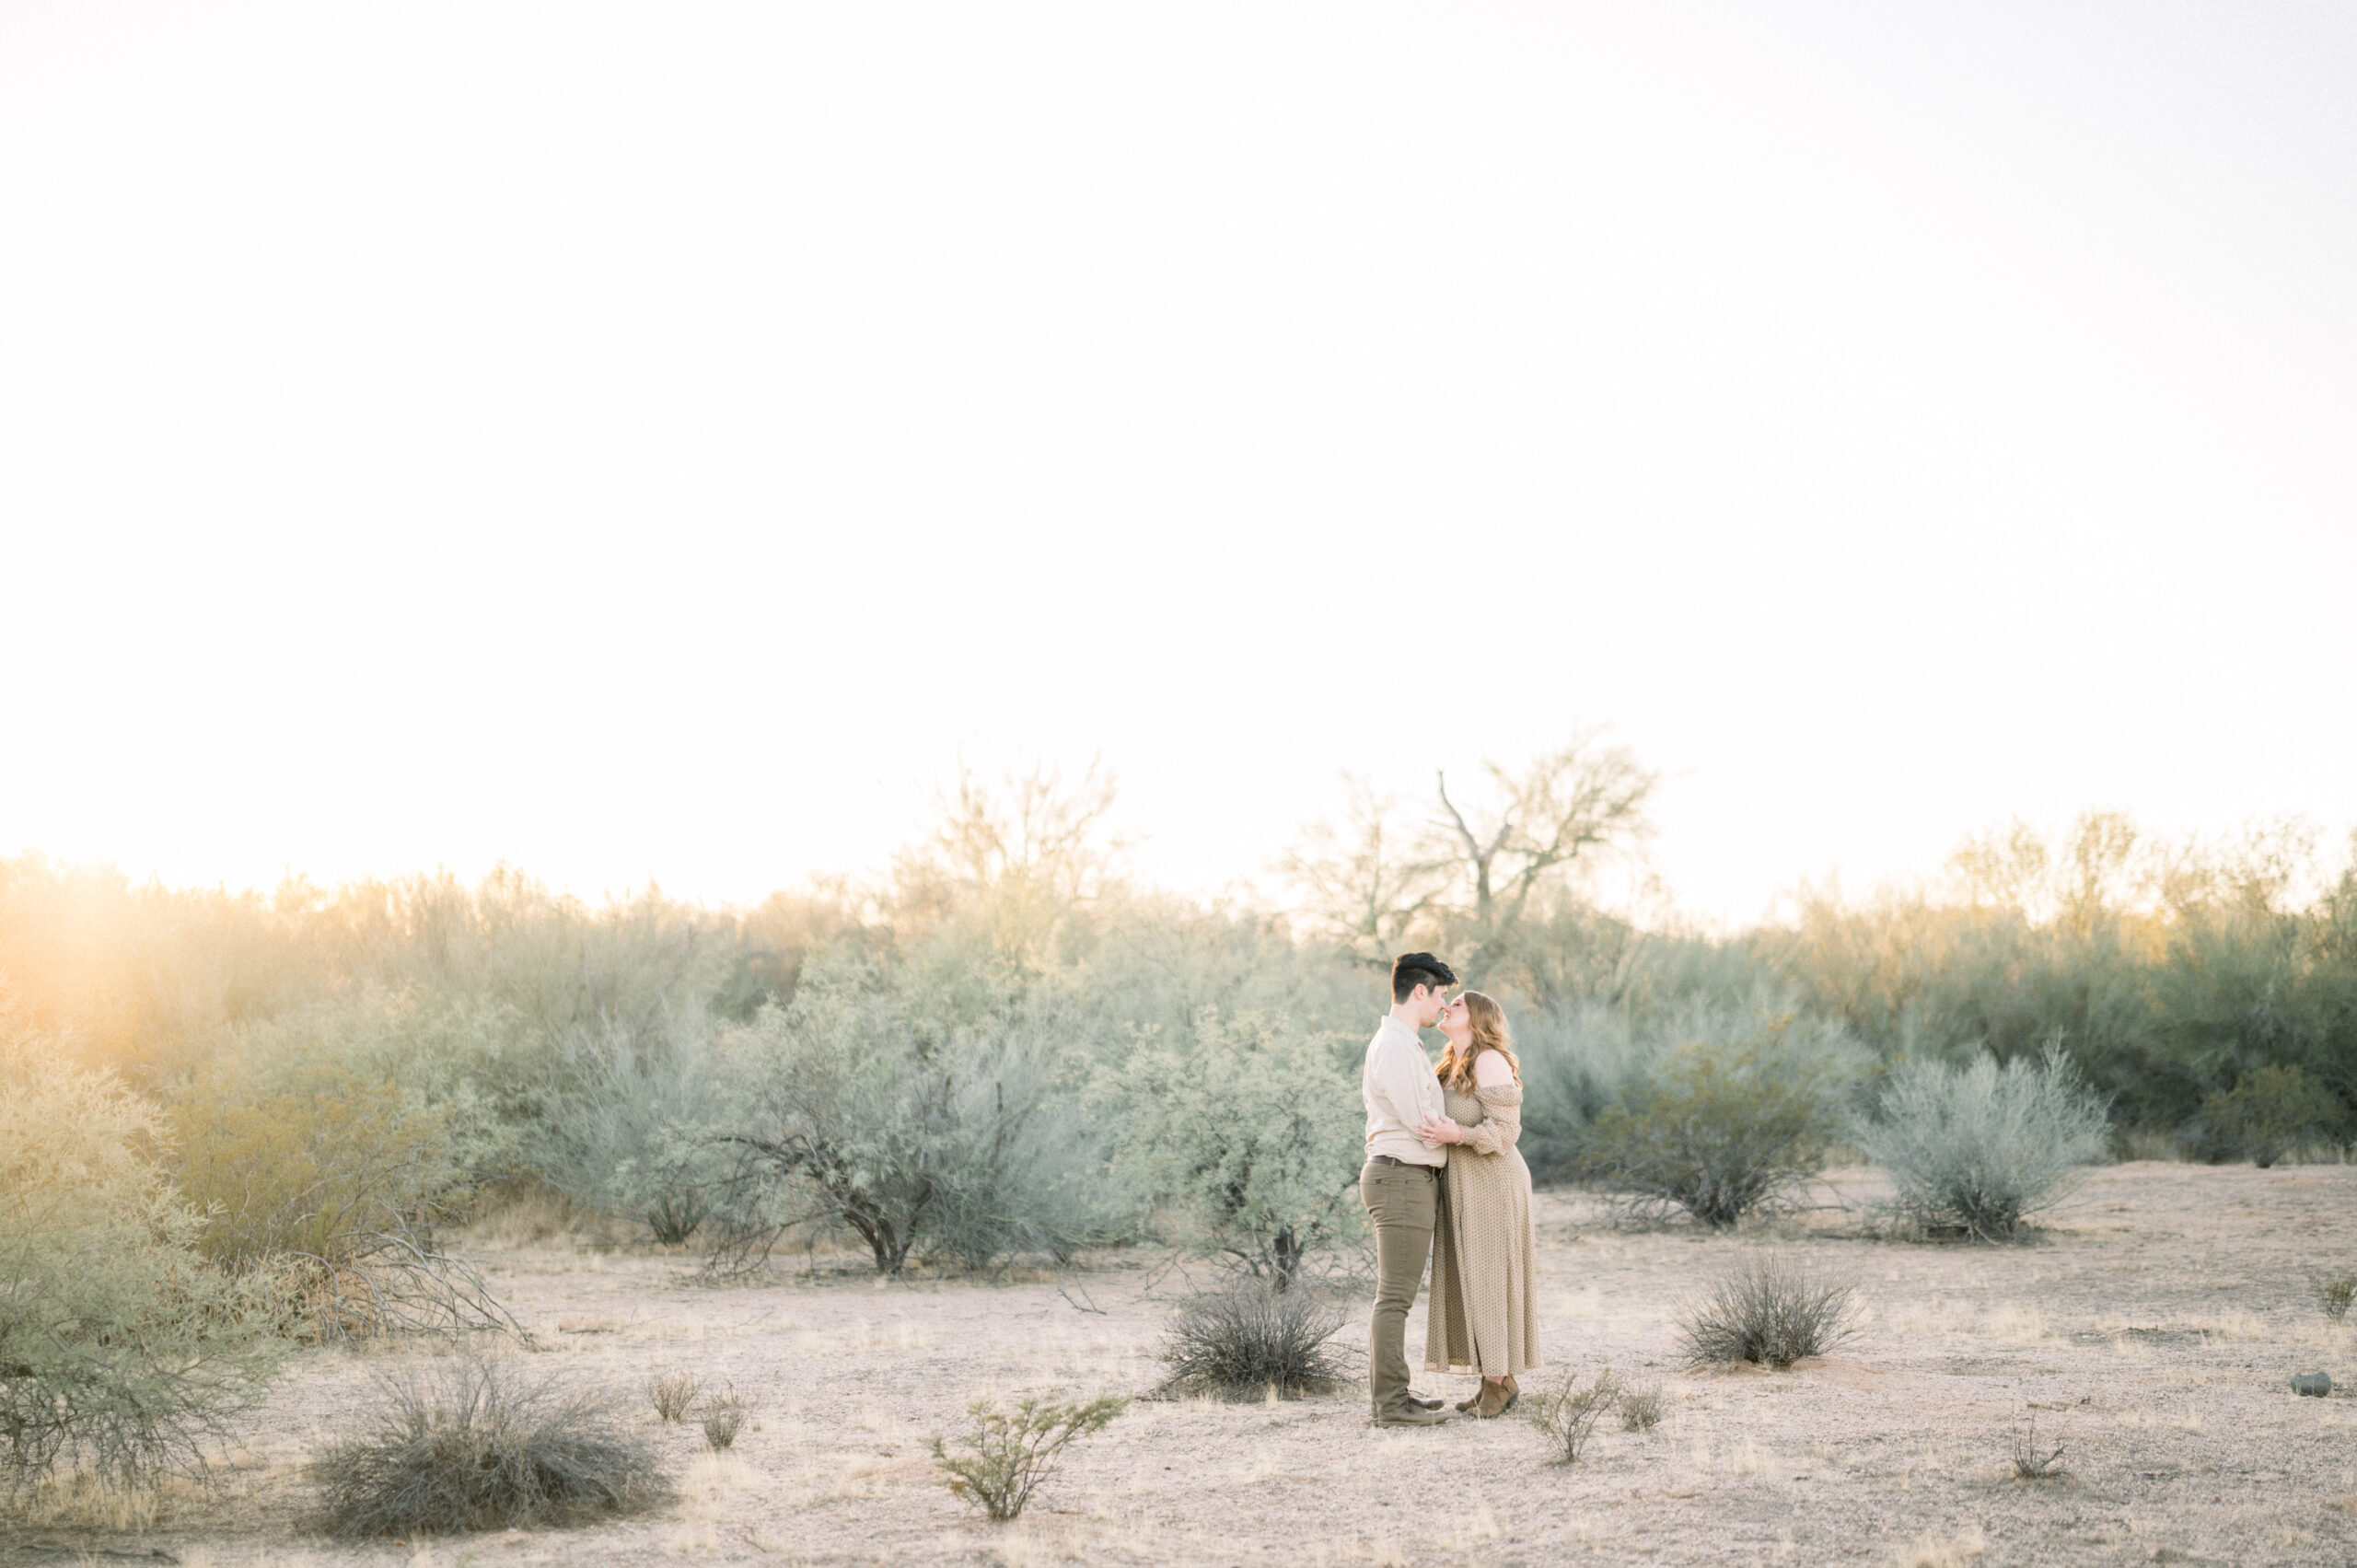 Mindy and Lynns stunning golden Scottsdale desert engagement session was one of my favorites! The lighting was absolutely beautiful.